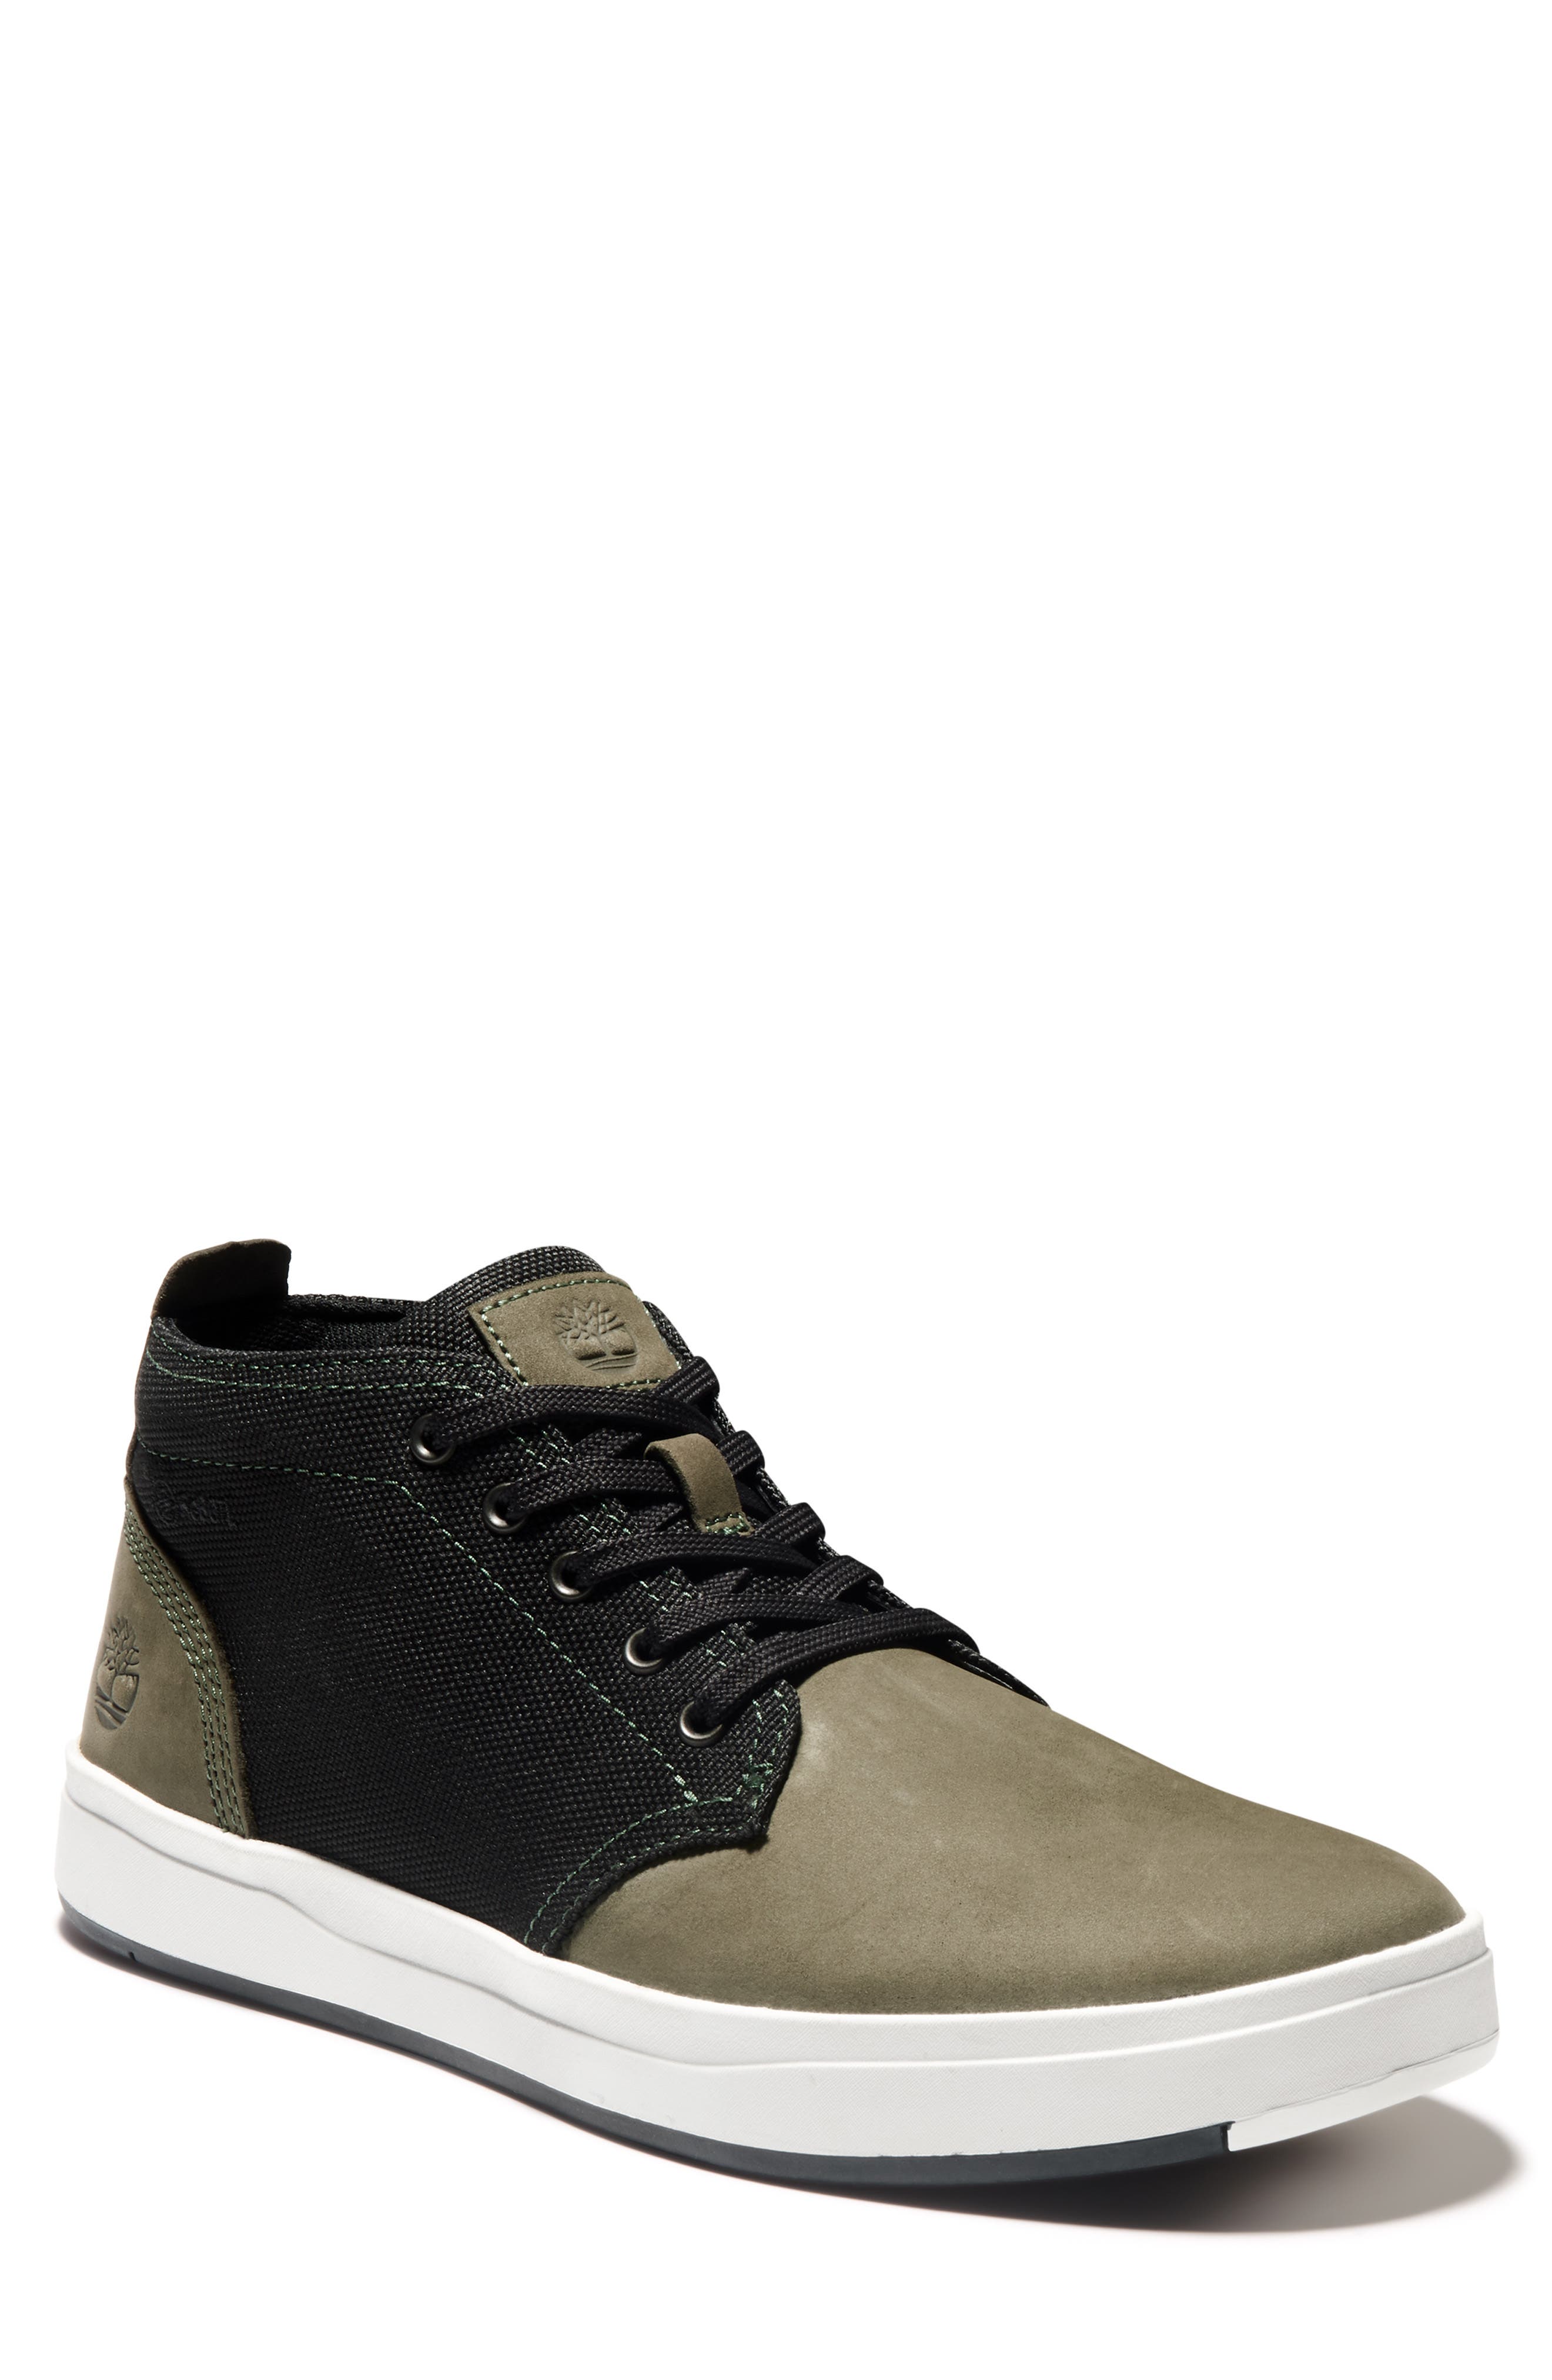 mens timberland shoes clearance